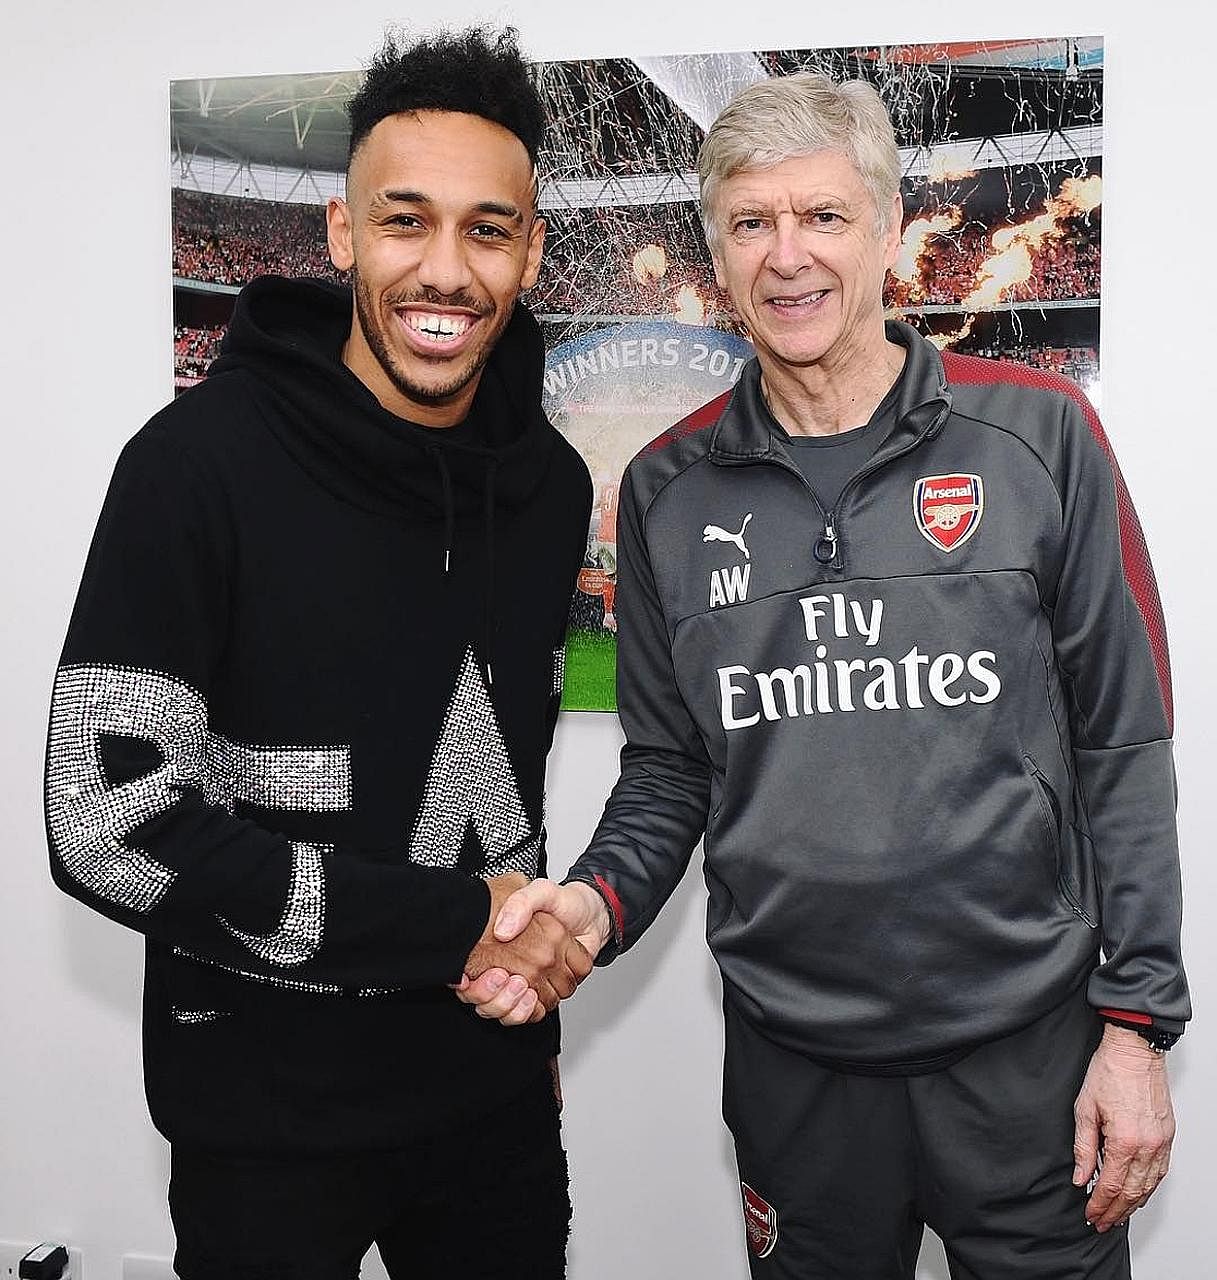 Pierre-Emerick Aubameyang being welcomed at Arsenal's training centre in London Colney by manager Arsene Wenger, who has singled out the striker's "huge physical capacity" as being important to his success in the Premier League.